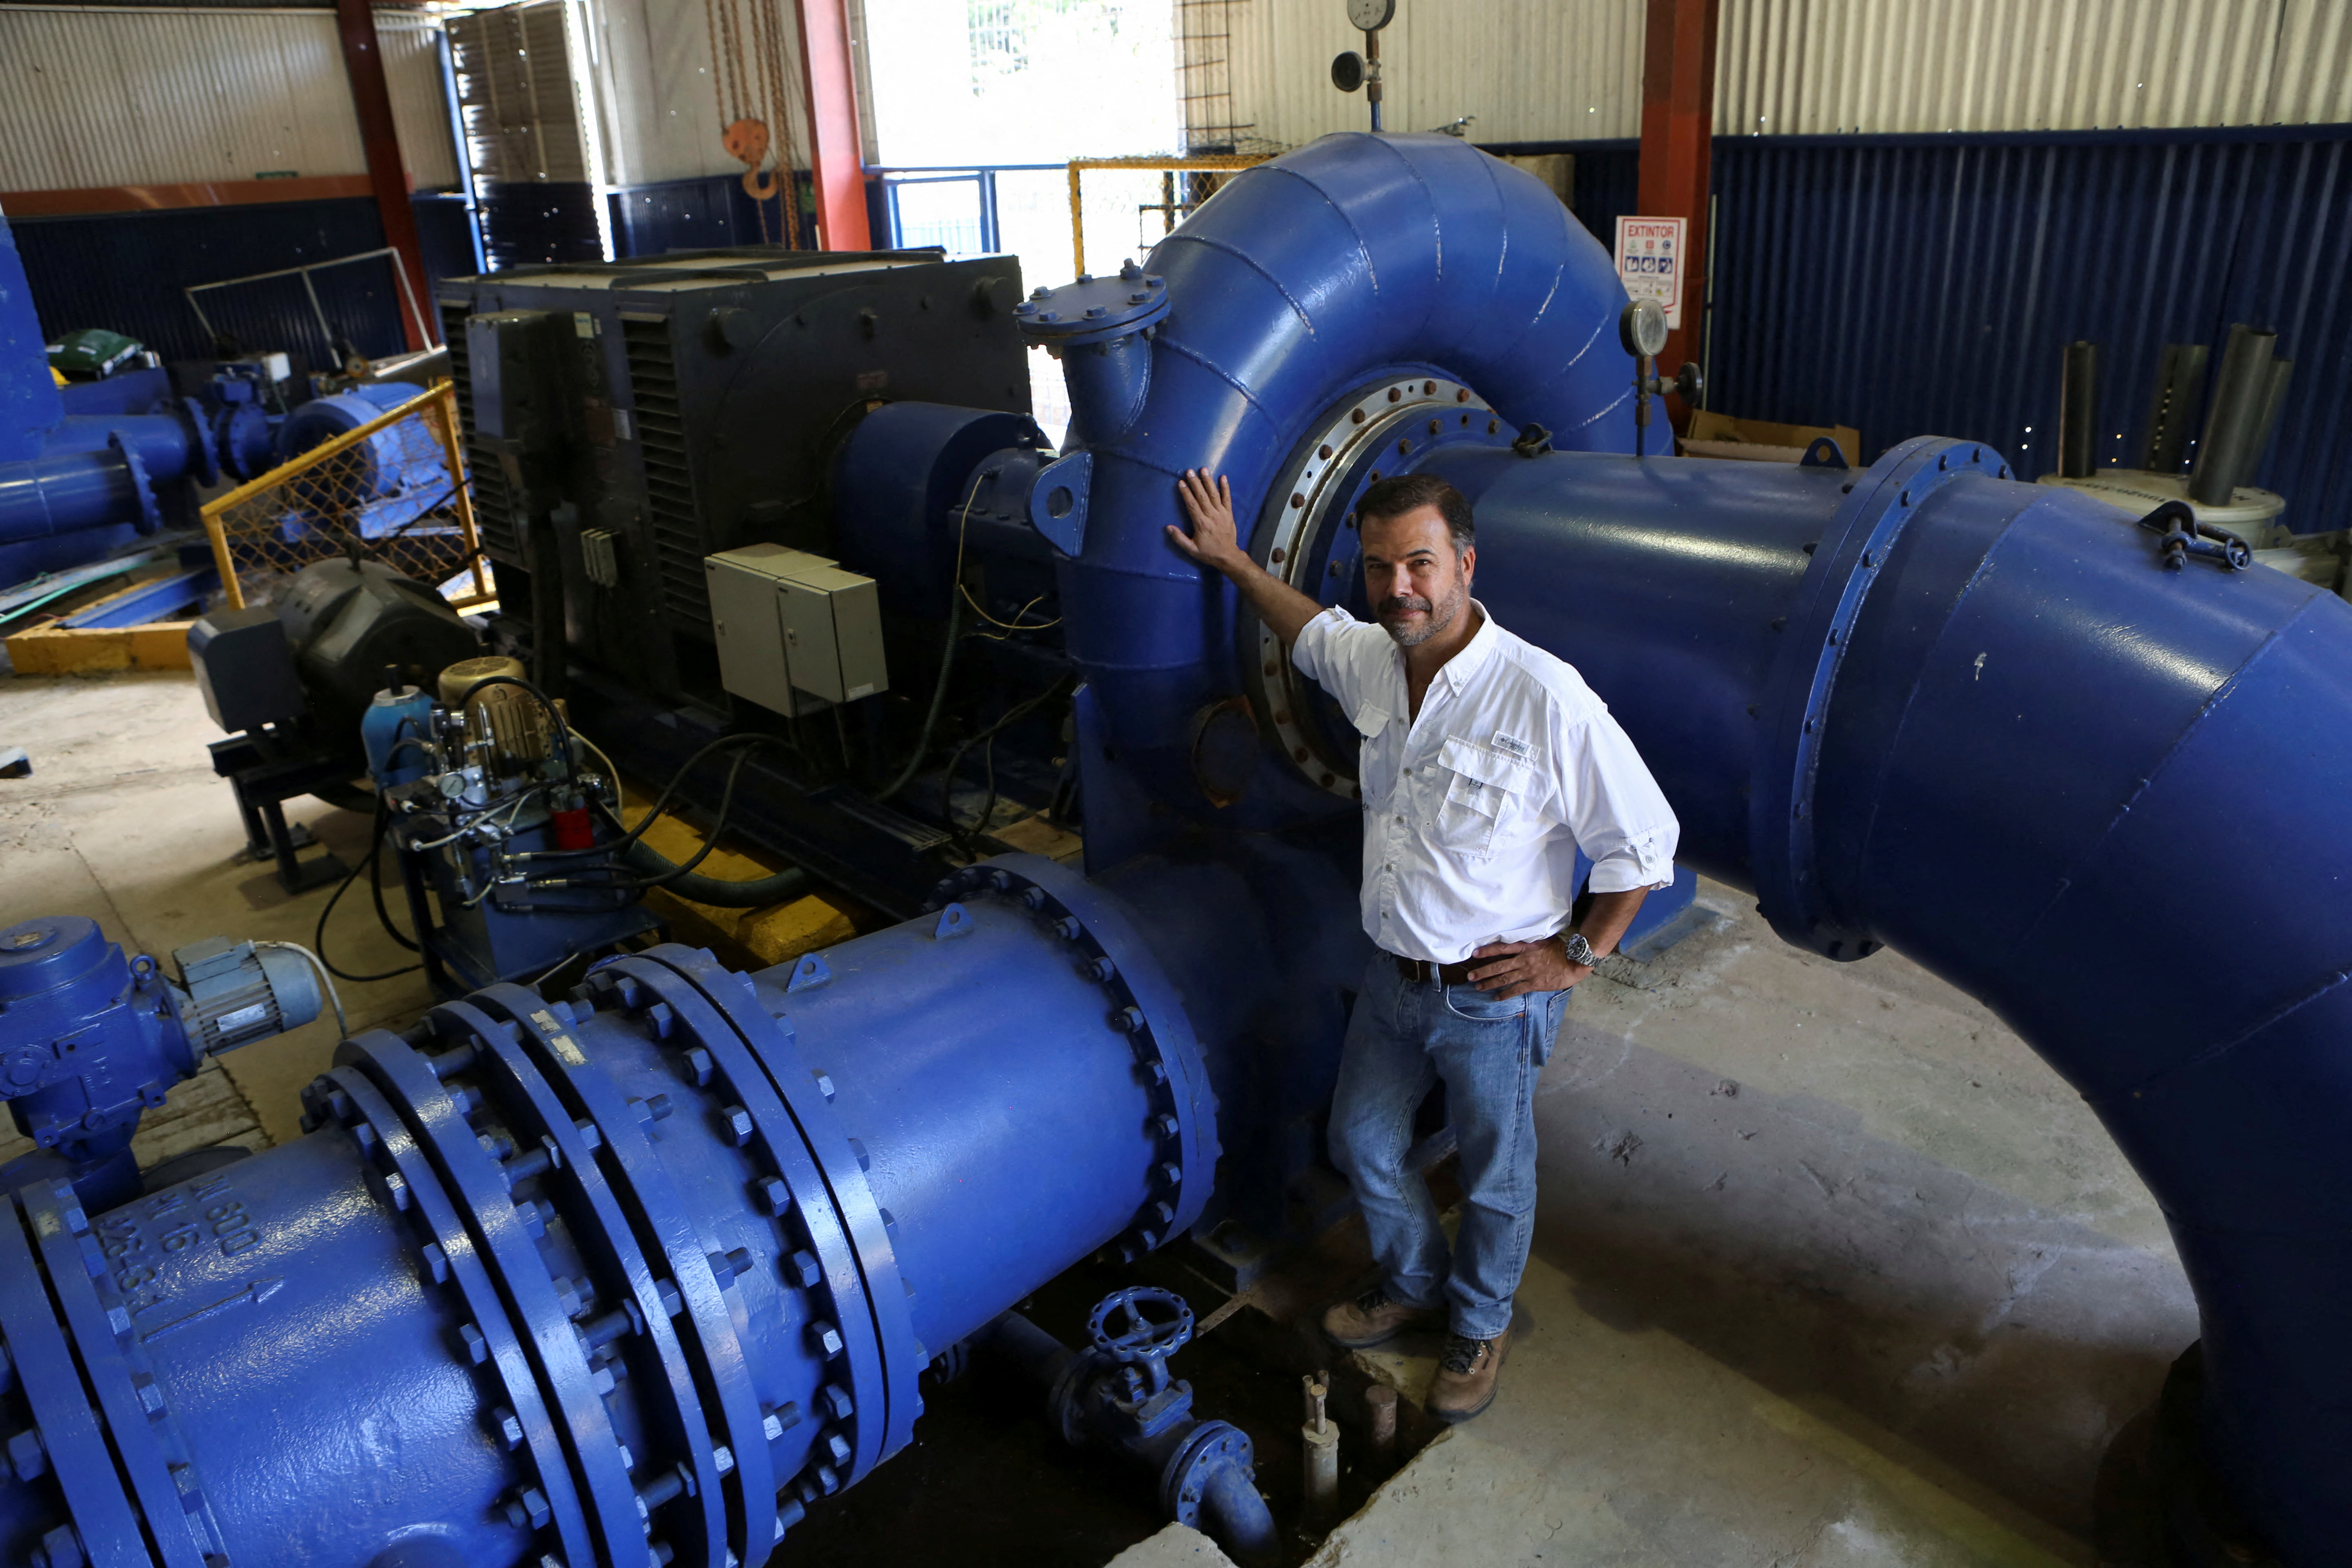 Eduardo Kopper, owner of Data Center CR, poses for a photo at the Poas I hydroelectric plant, which provides energy to the computers used for cryptocurrency mining, in Alajuela, Costa Rica January 8, 2022. Picture taken January 8, 2022. REUTERS/Mayela Lopez